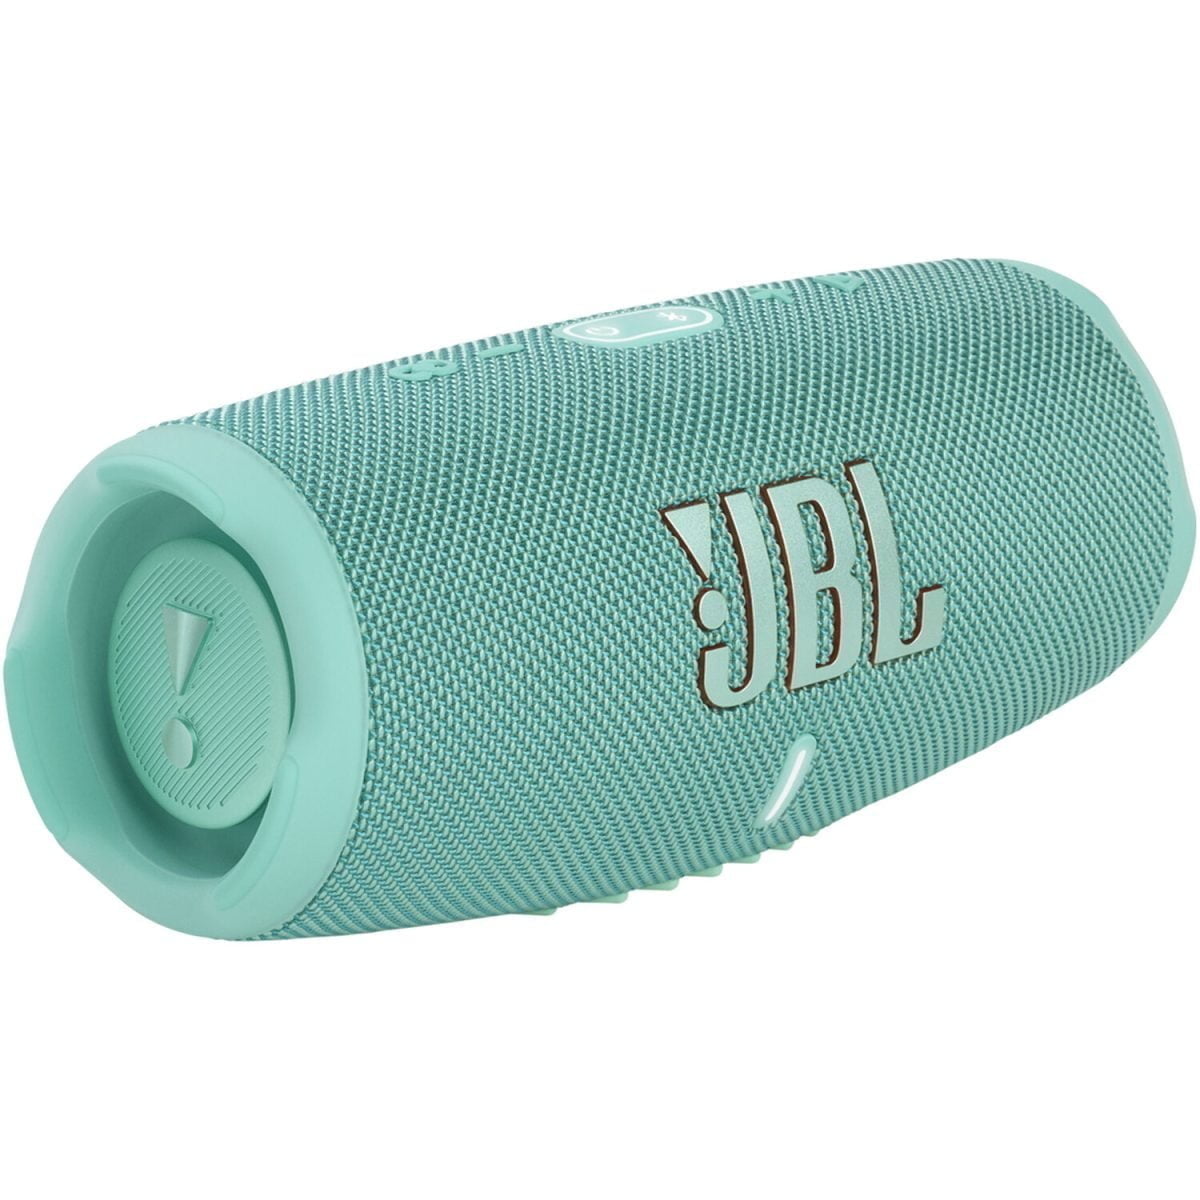 Jbl Jblcharge5Tealam Charge 5 Portable Speaker 1622610 Jbl &Amp;Lt;H1&Amp;Gt;Jbl - Charge5 Portable Waterproof Speaker With Powerbank - Teal&Amp;Lt;/H1&Amp;Gt; Https://Www.youtube.com/Watch?V=Fn2W7C7Snr8 Play And Charge Endlessly. Take The Party With You No Matter What The Weather. The Jbl Charge 5 Speaker Delivers Bold Jbl Original Pro Sound, With Its Optimized Long Excursion Driver, Separate Tweeter And Dual Pumping Jbl Bass Radiators. Up To 20 Hours Of Playtime And A Handy Powerbank To Keep Your Devices Charged To Keep The Party Going All Night. Rain? Spilled Drinks? Beach Sand? The Ip67 Waterproof And Dustproof Charge 5 Survives Whatever Comes Its Way. Thanks To Partyboost, You Can Connect Multiple Jbl Partyboost-Enabled Speakers For A Sound Big Enough For Any Crowd. With All-New Colors Inspired By The Latest Street Fashion Trends, It Looks As Great As It Sounds. Jbl Speaker Jbl Charge5 Portable Waterproof Speaker With Powerbank - Teal